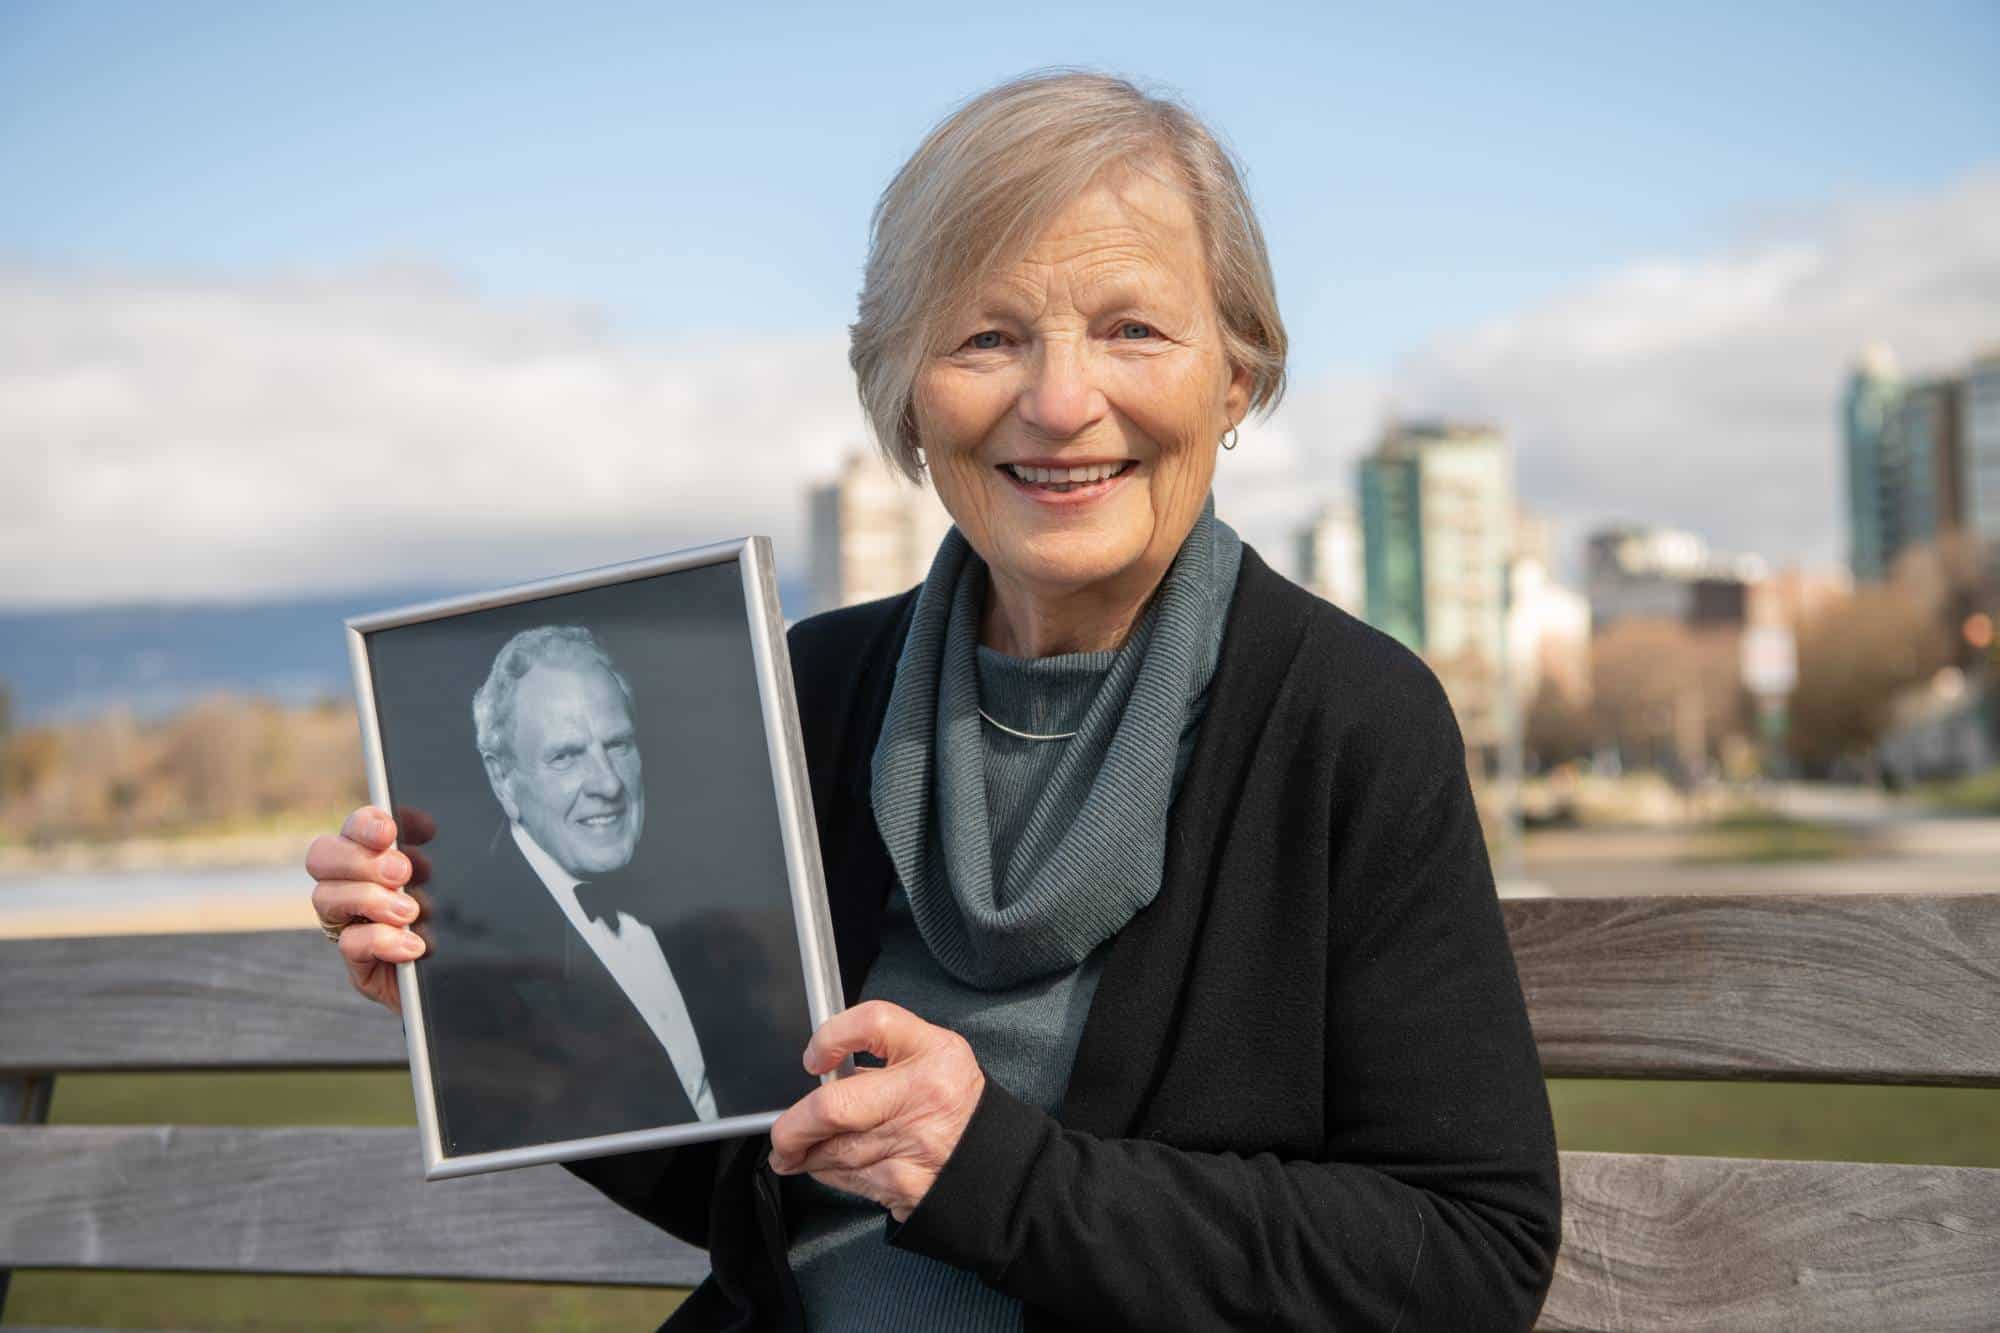 Frances holding a picture of her late husband while describing the early intervention memory clinic